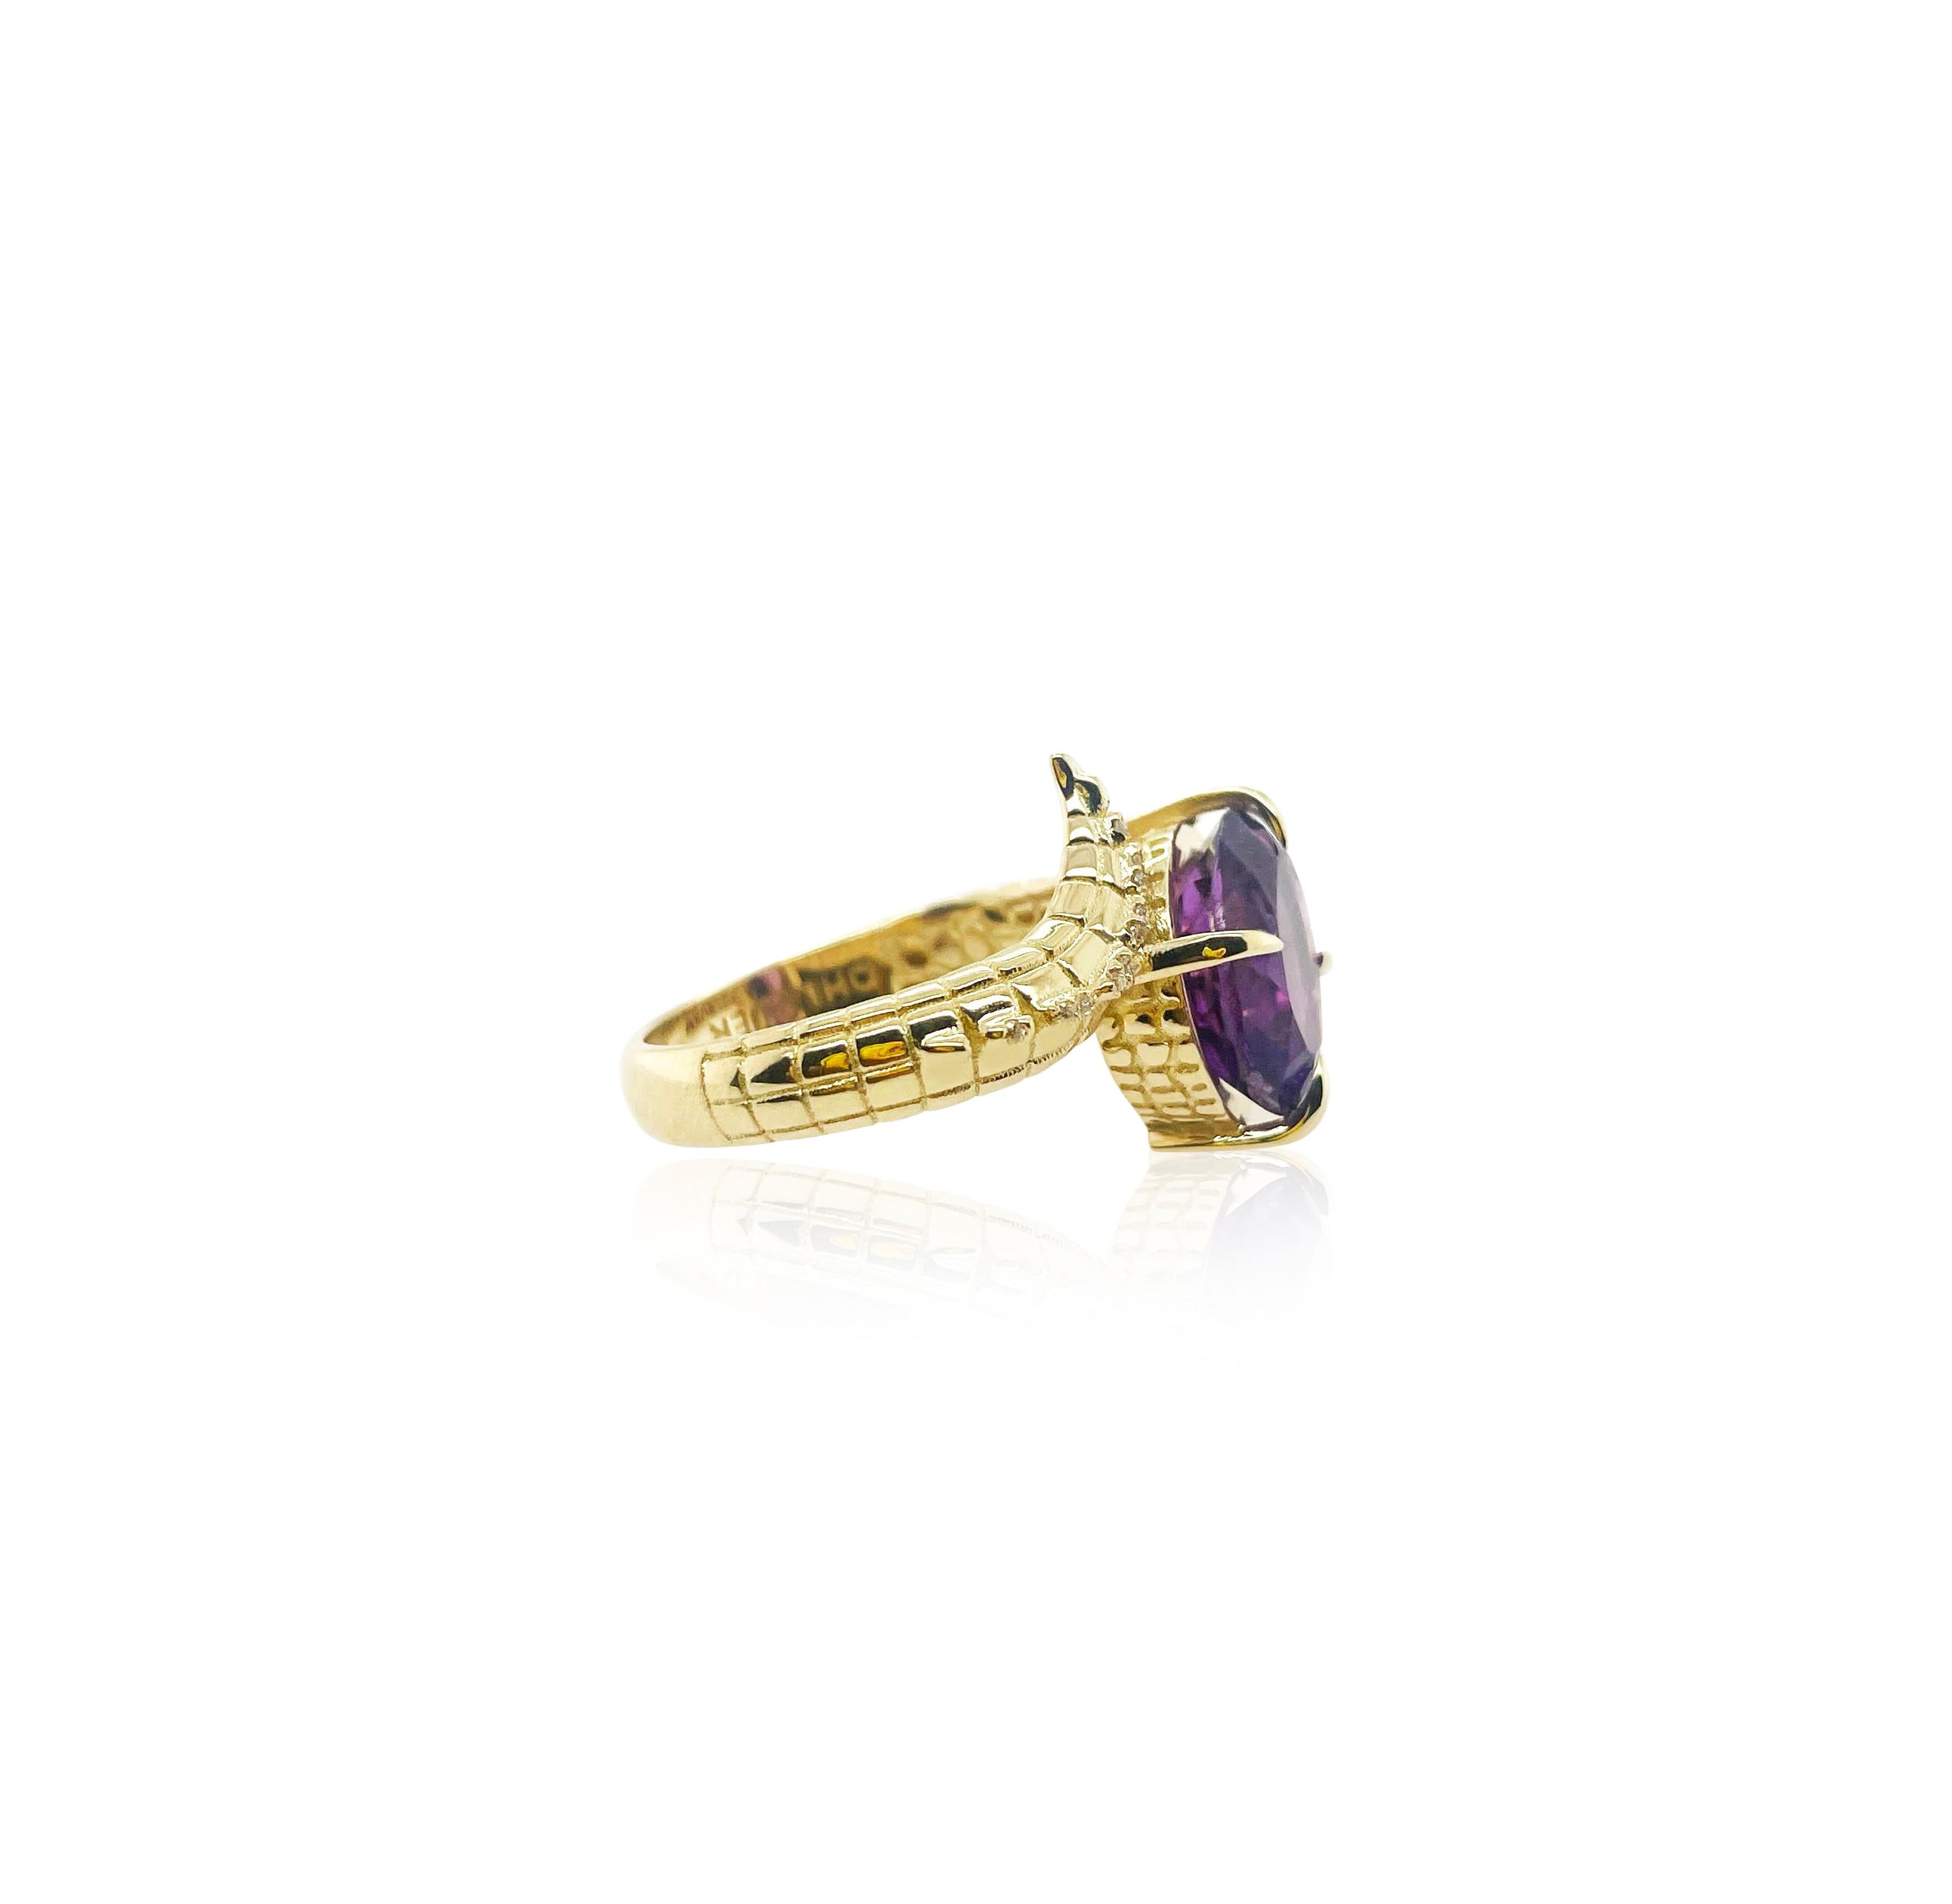 For Sale:  Croc Dragon Tail Ring with 5ct Oval Cut Amethyst with diamond spikes  4